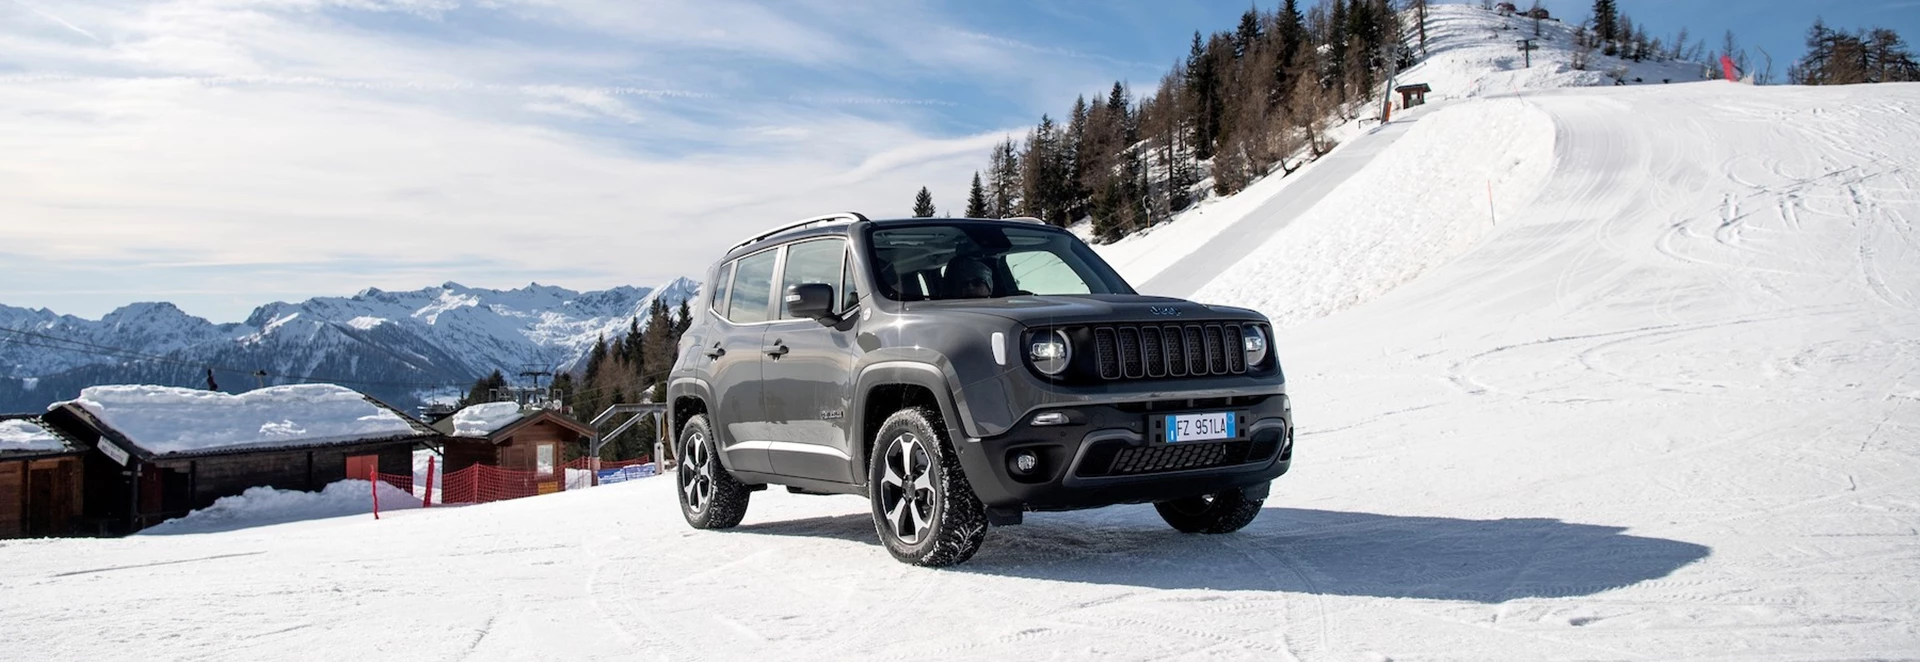 Everything you need to know about the new Jeep Renegade 4xe plug-in hybrid